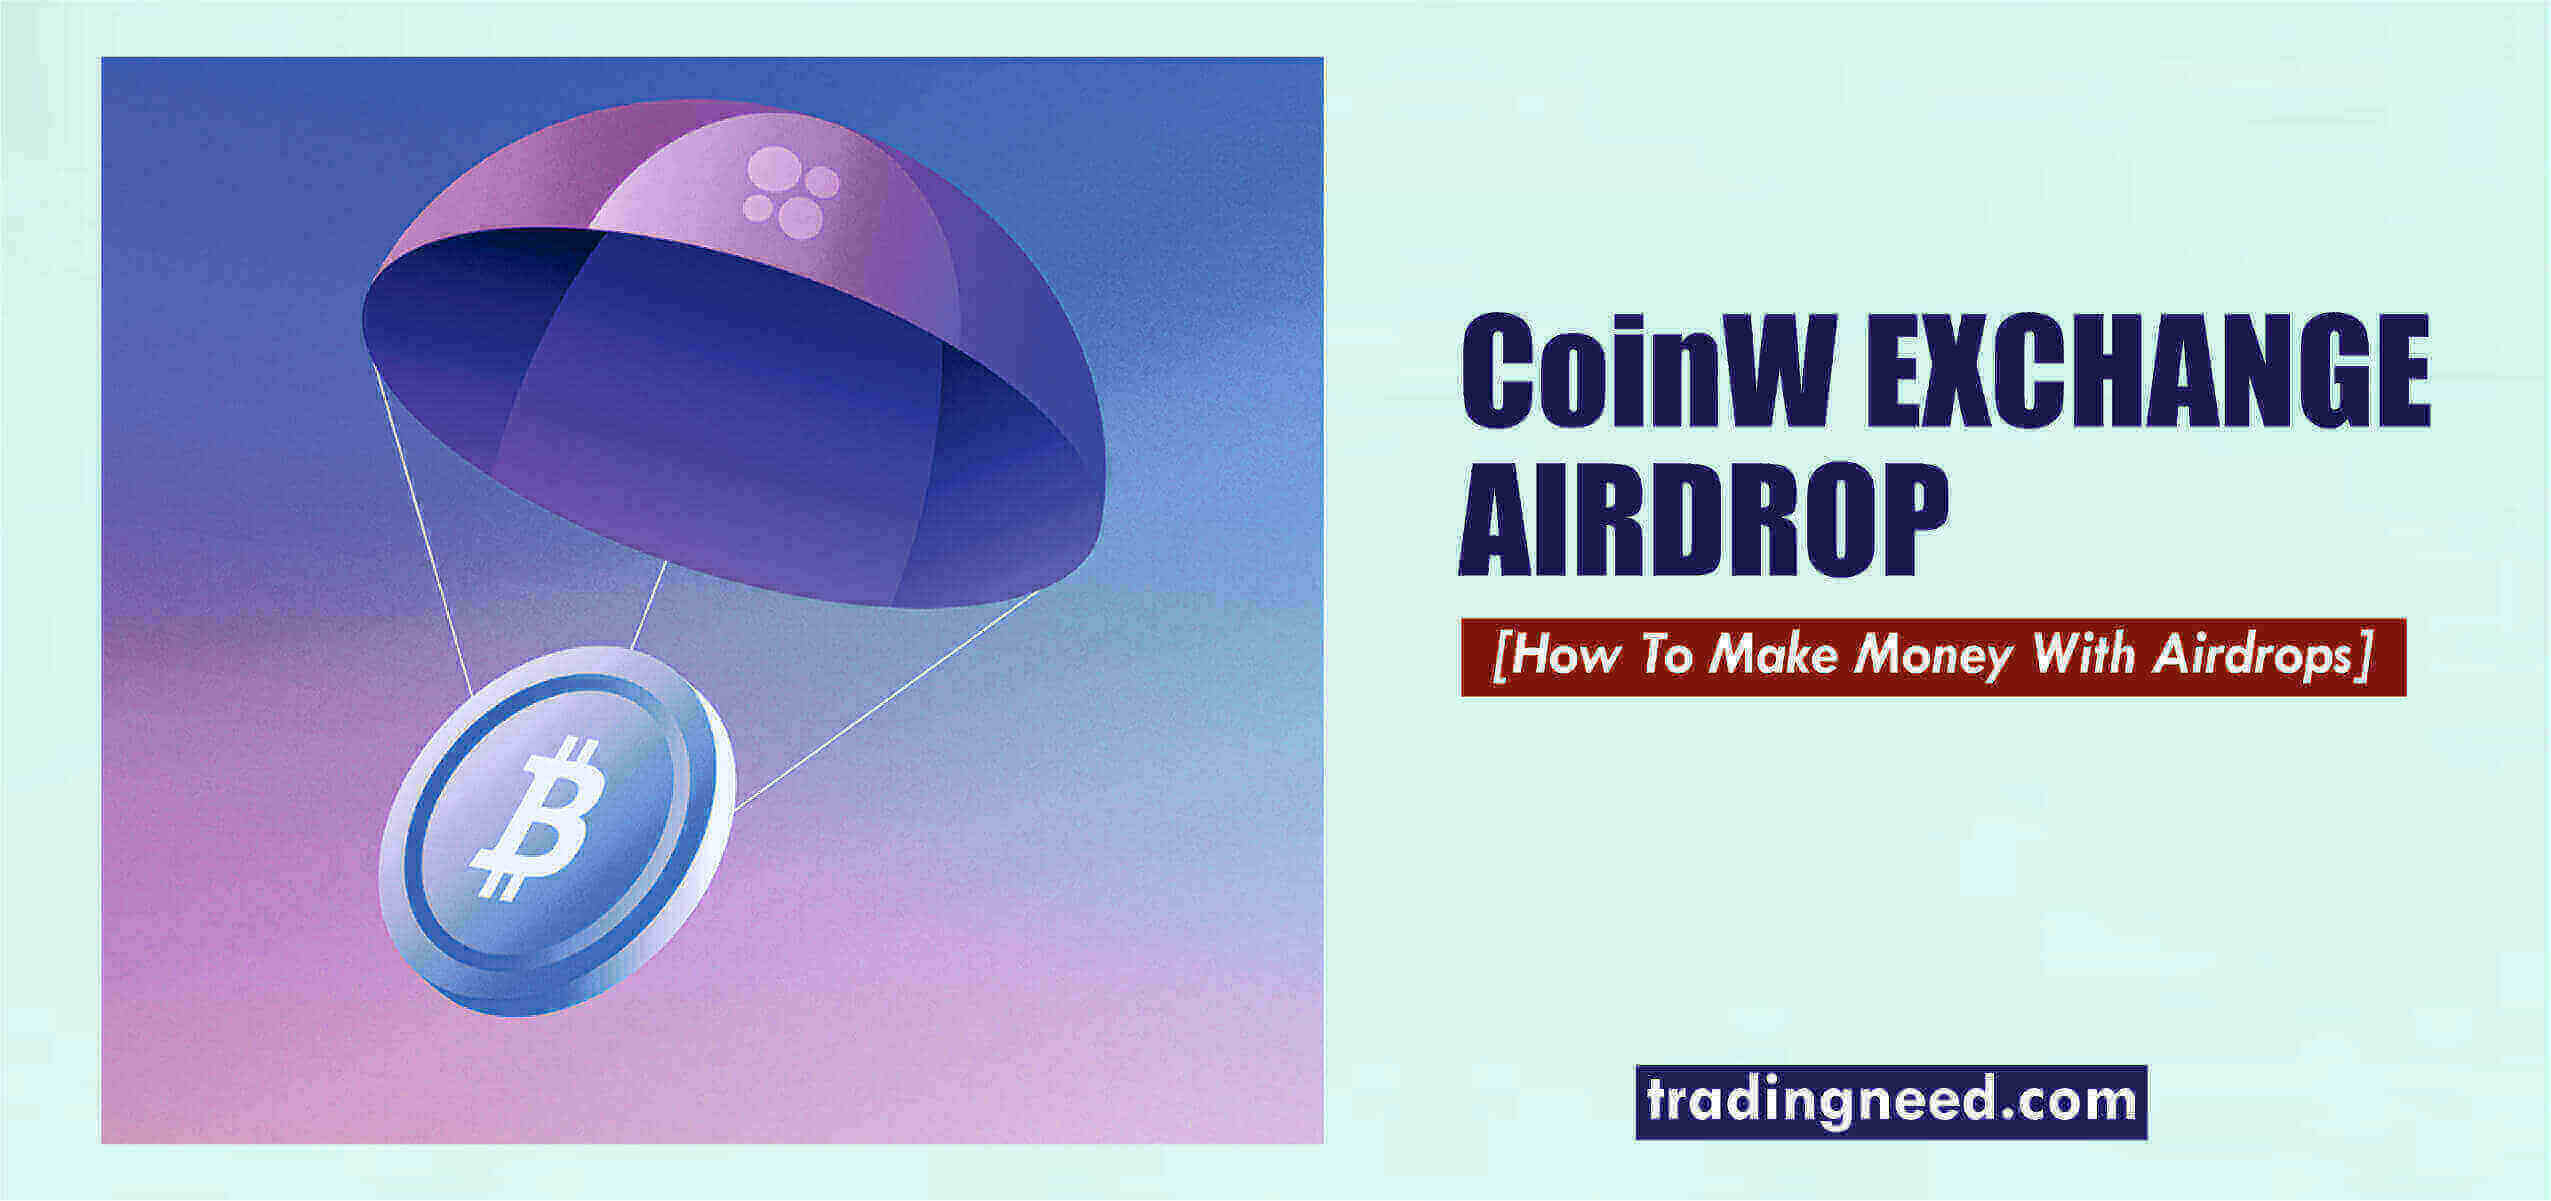 CoinW airdrop